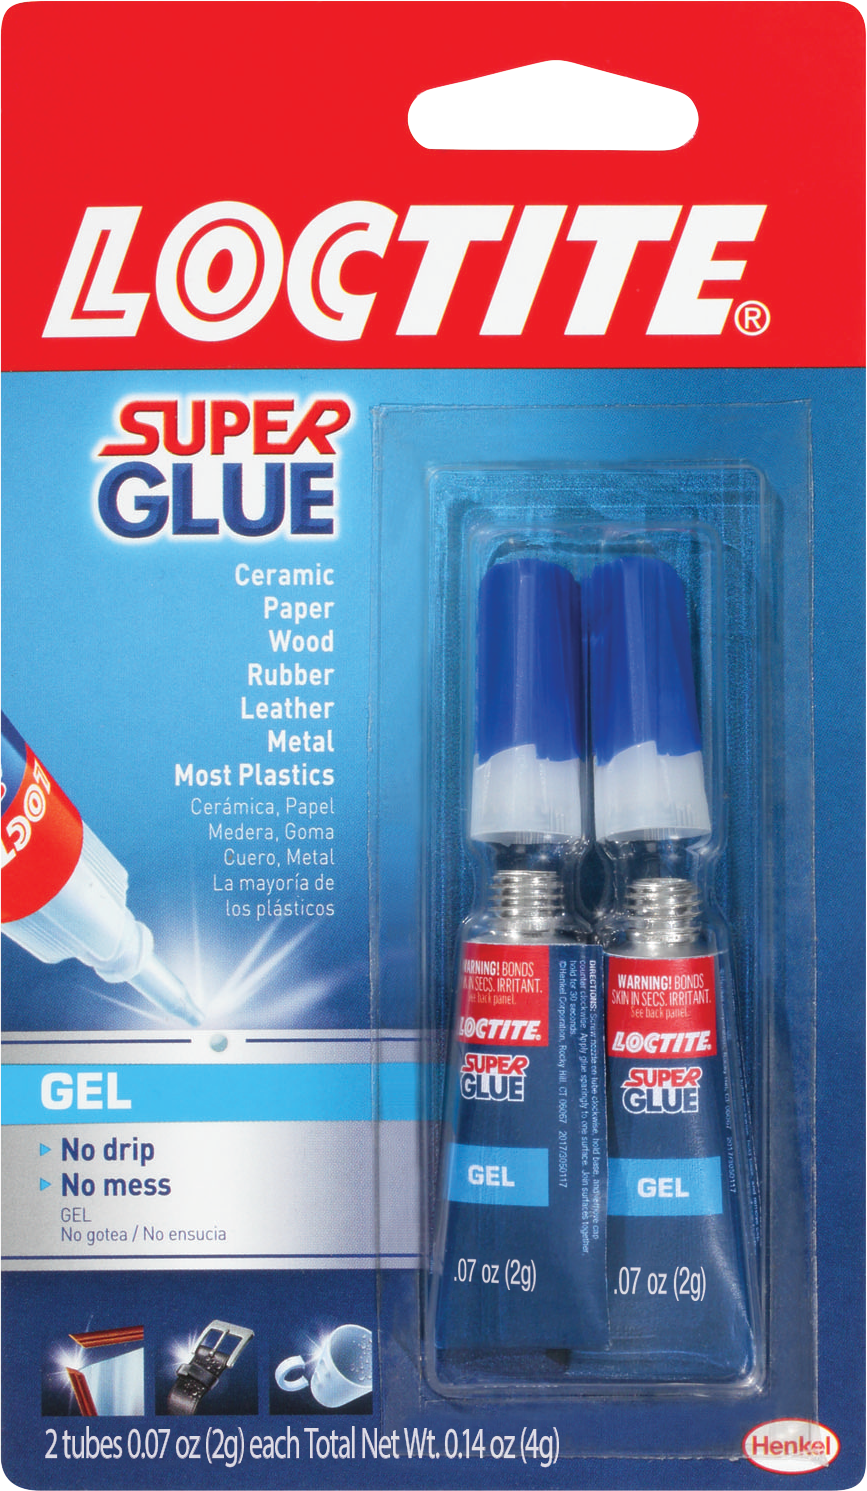 Super Glue All Purpose Adhesive,Super Glue Gel,Instantly Strong Adhesive for Bonding Glass,Mirror,Metal,Plastic,Rubber,Rock,Wood,Leather,Ceramics